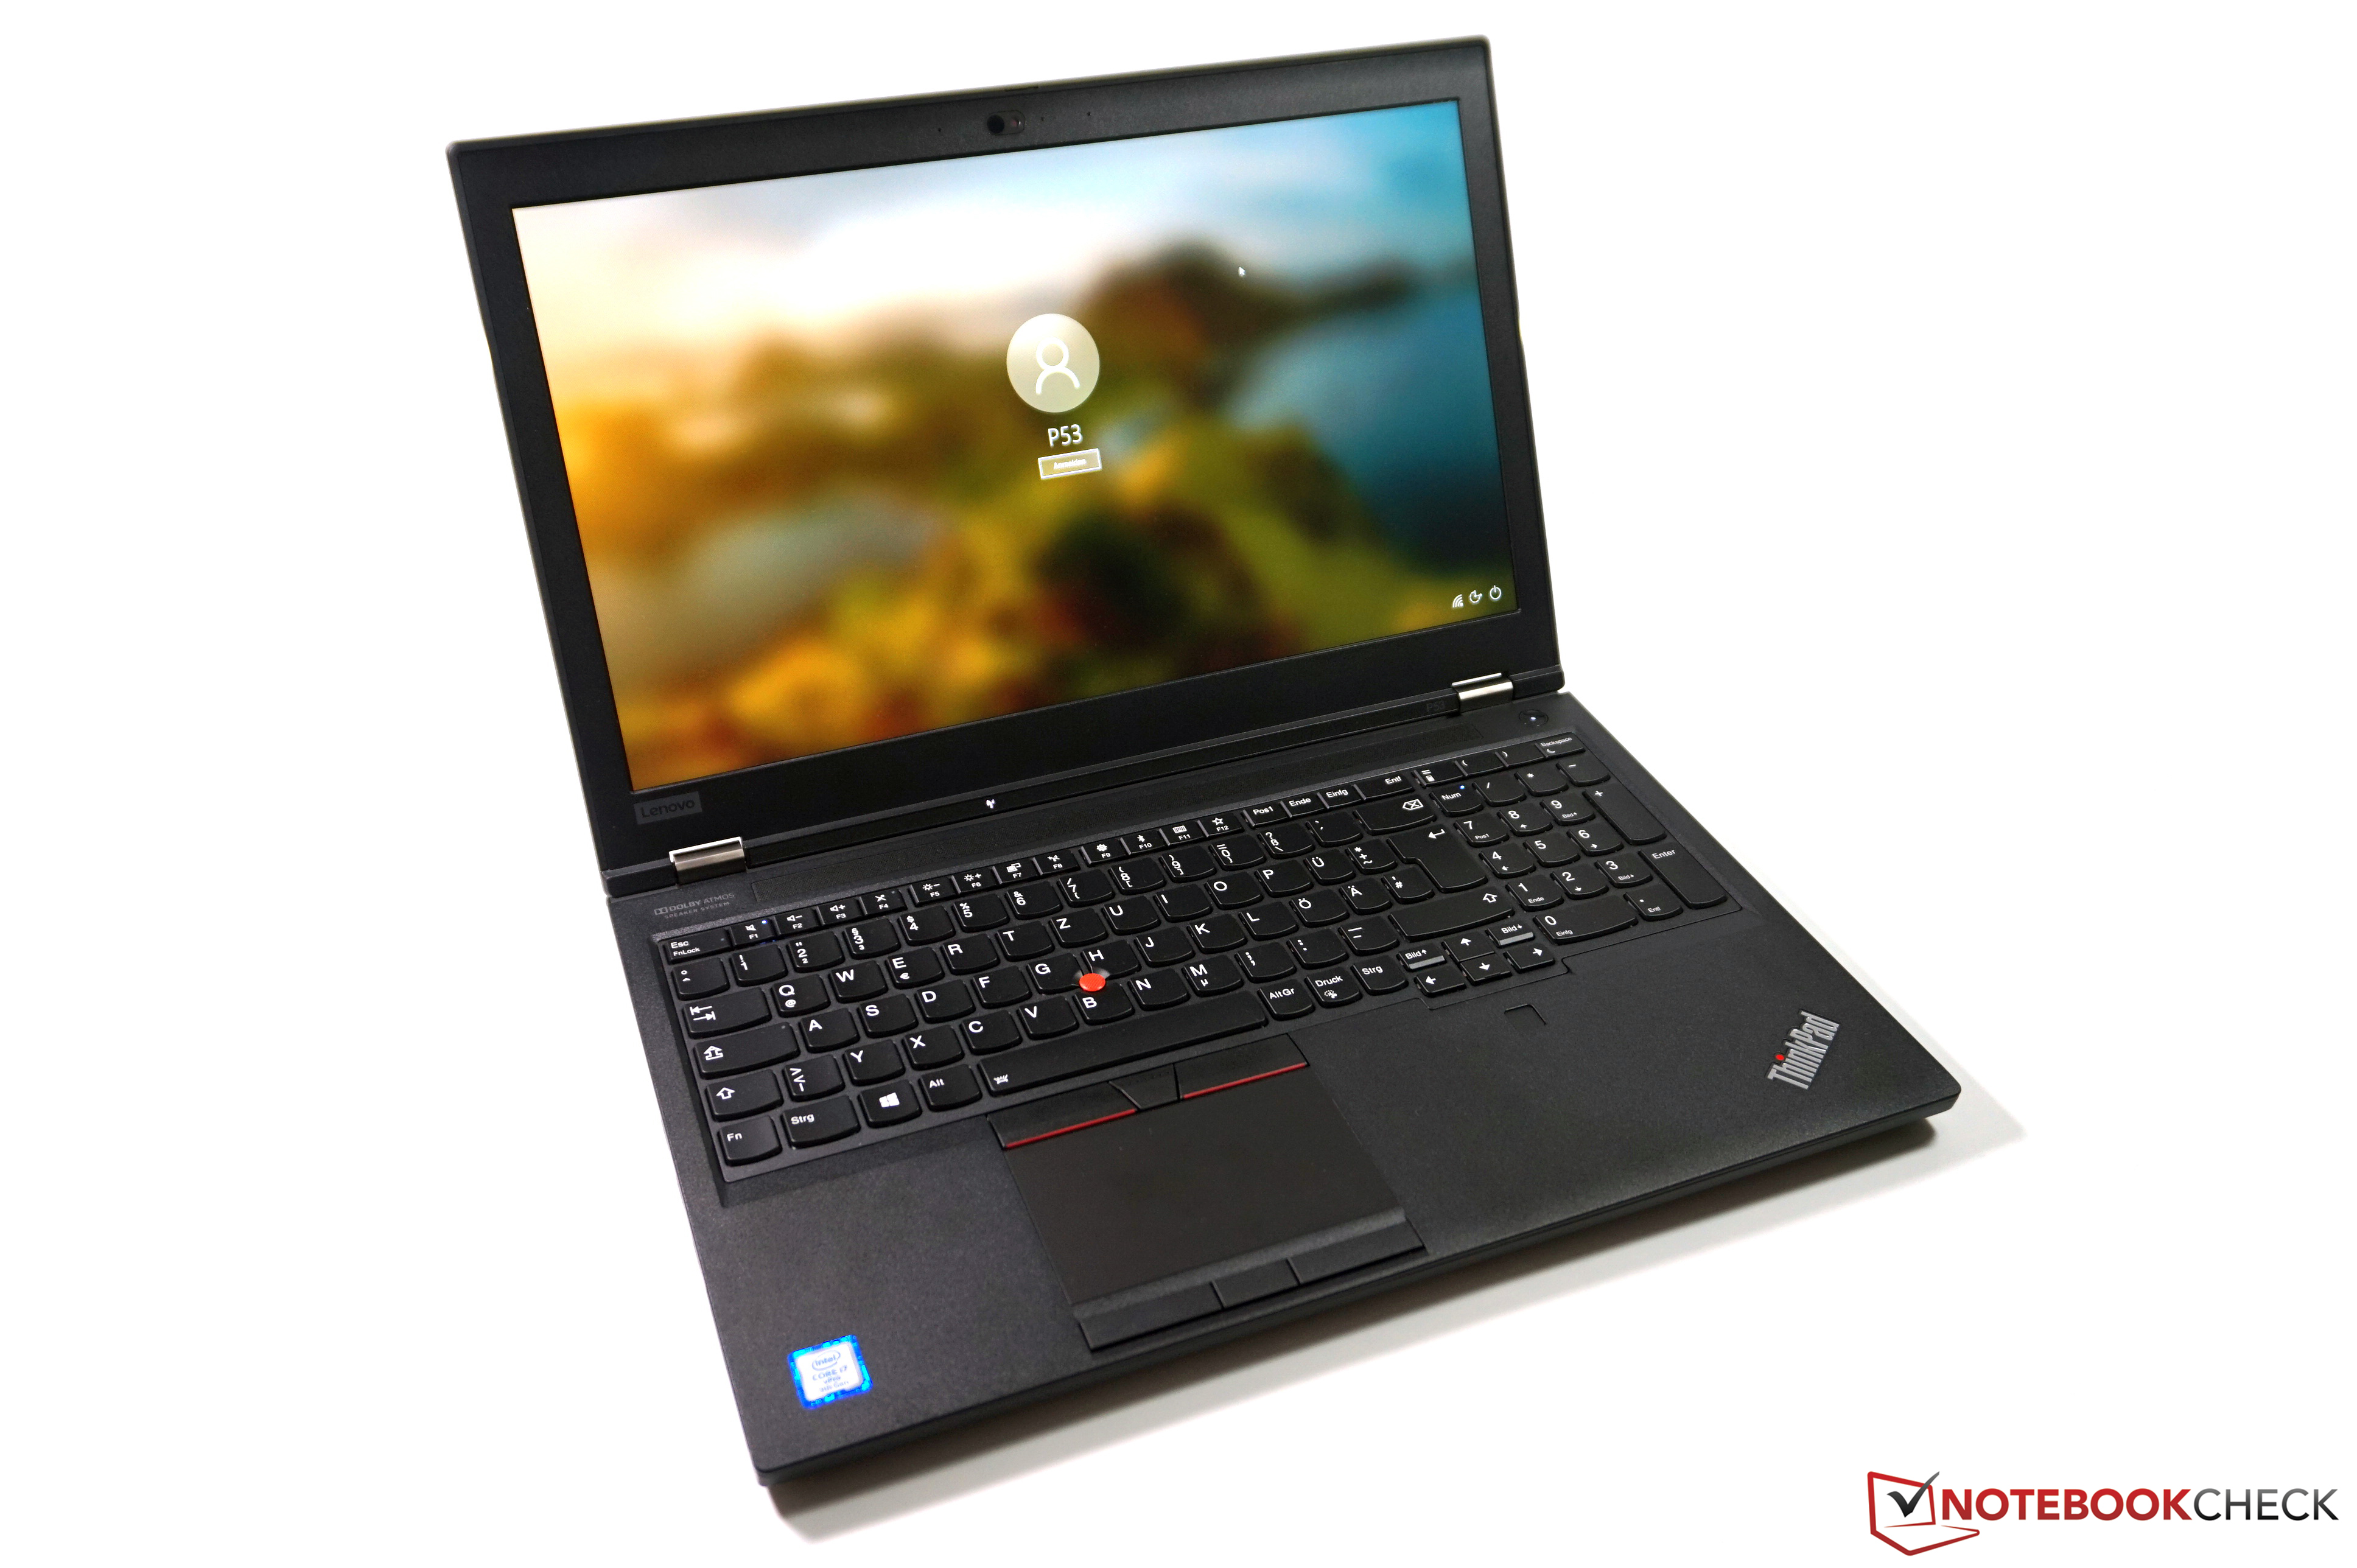 ThinkPad P53 in Classic workstation with a of GPU performance - NotebookCheck.net Reviews